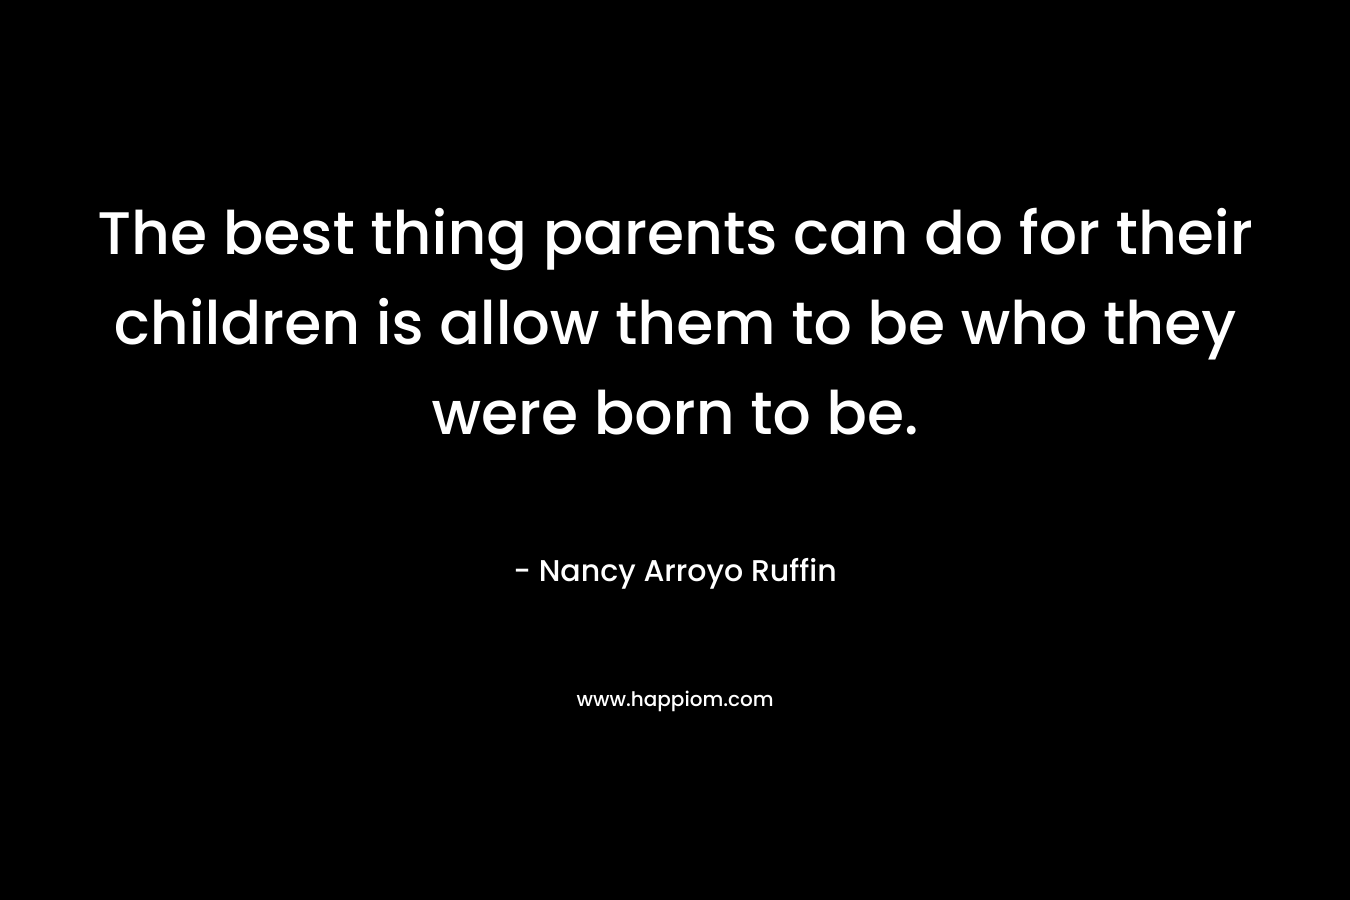 The best thing parents can do for their children is allow them to be who they were born to be. – Nancy Arroyo Ruffin